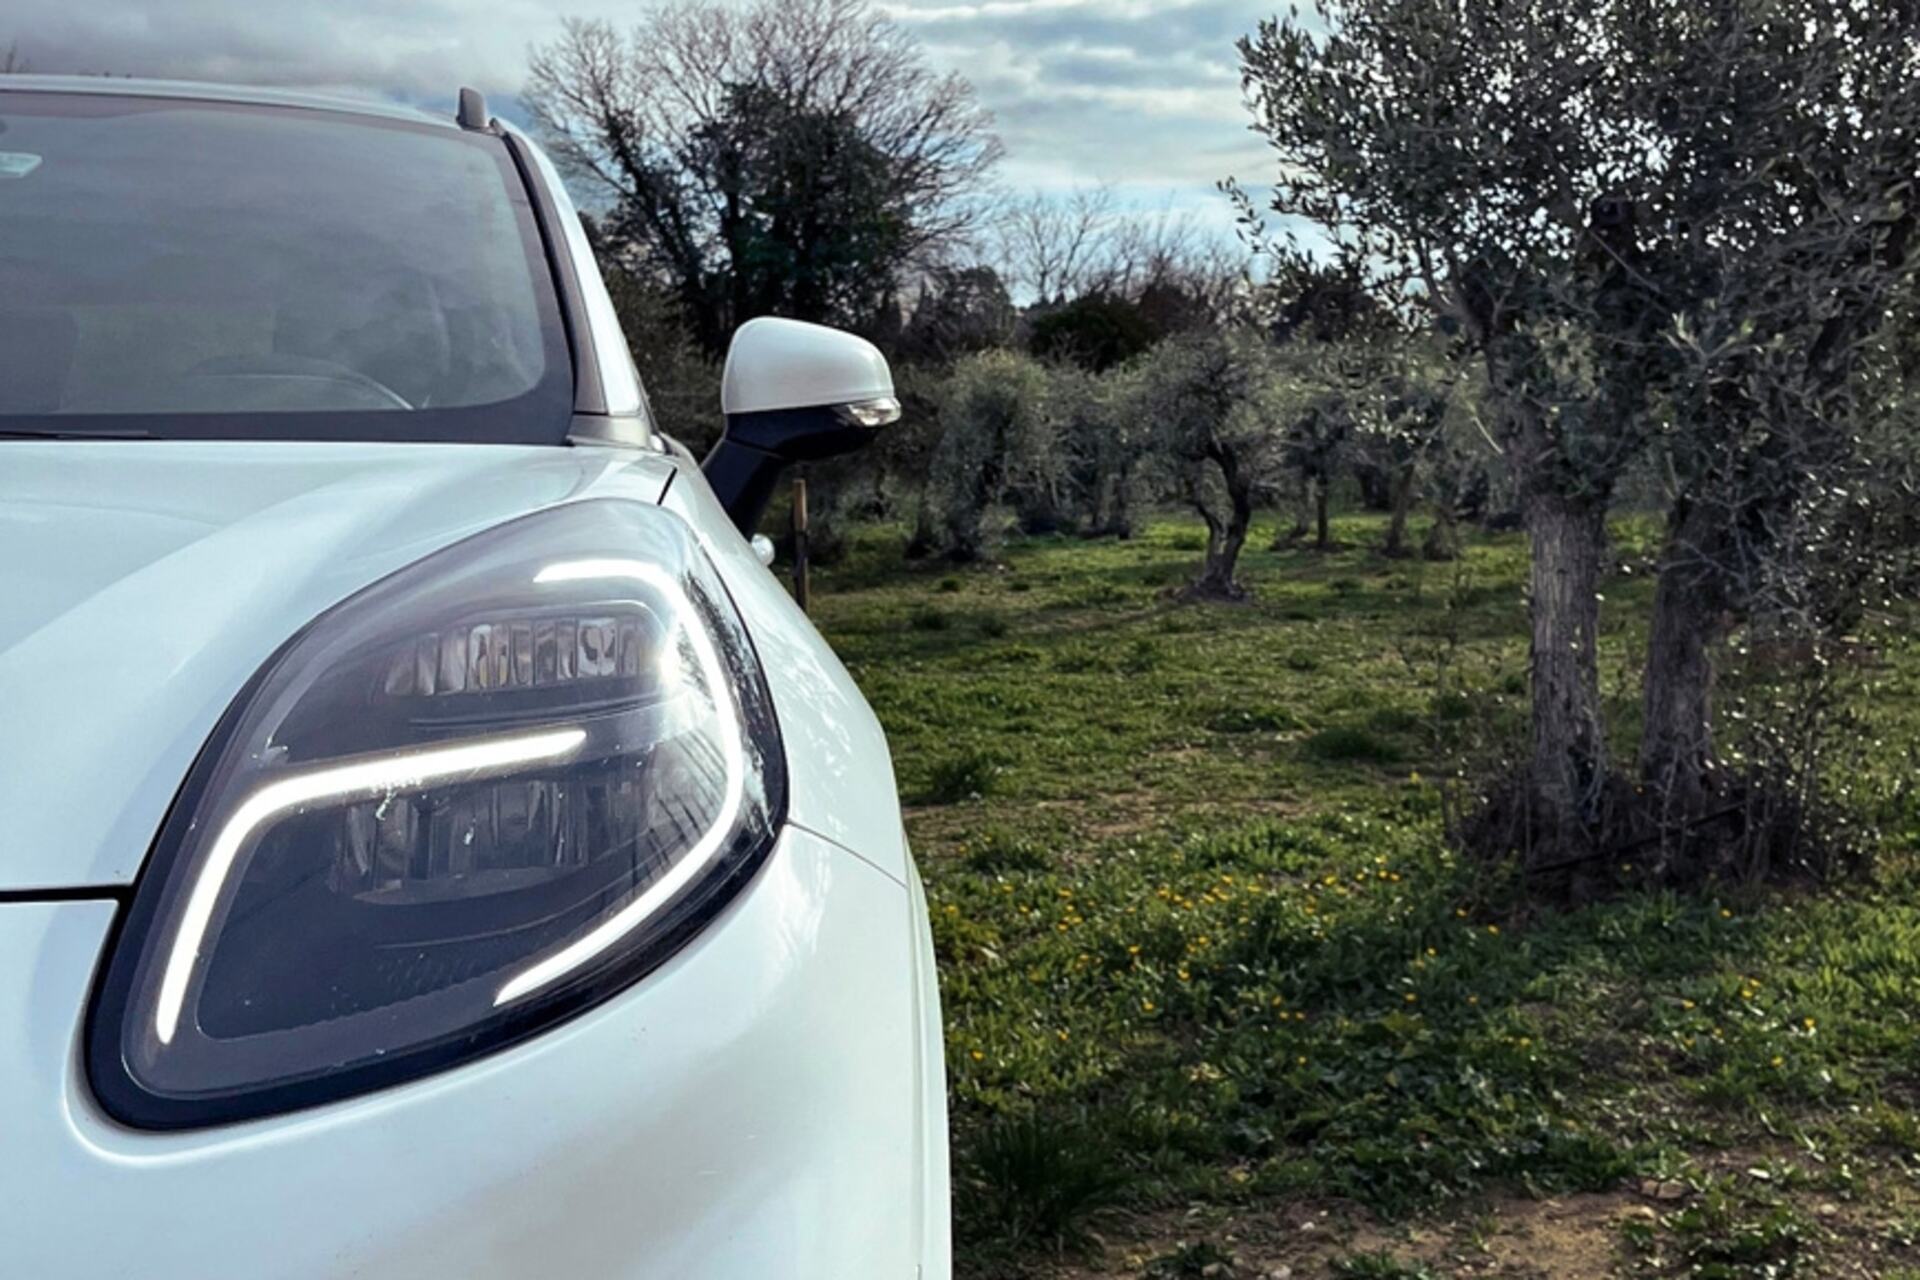 Olives: a Ford vehicle next to an olive tree: the future is in biocomposite materials